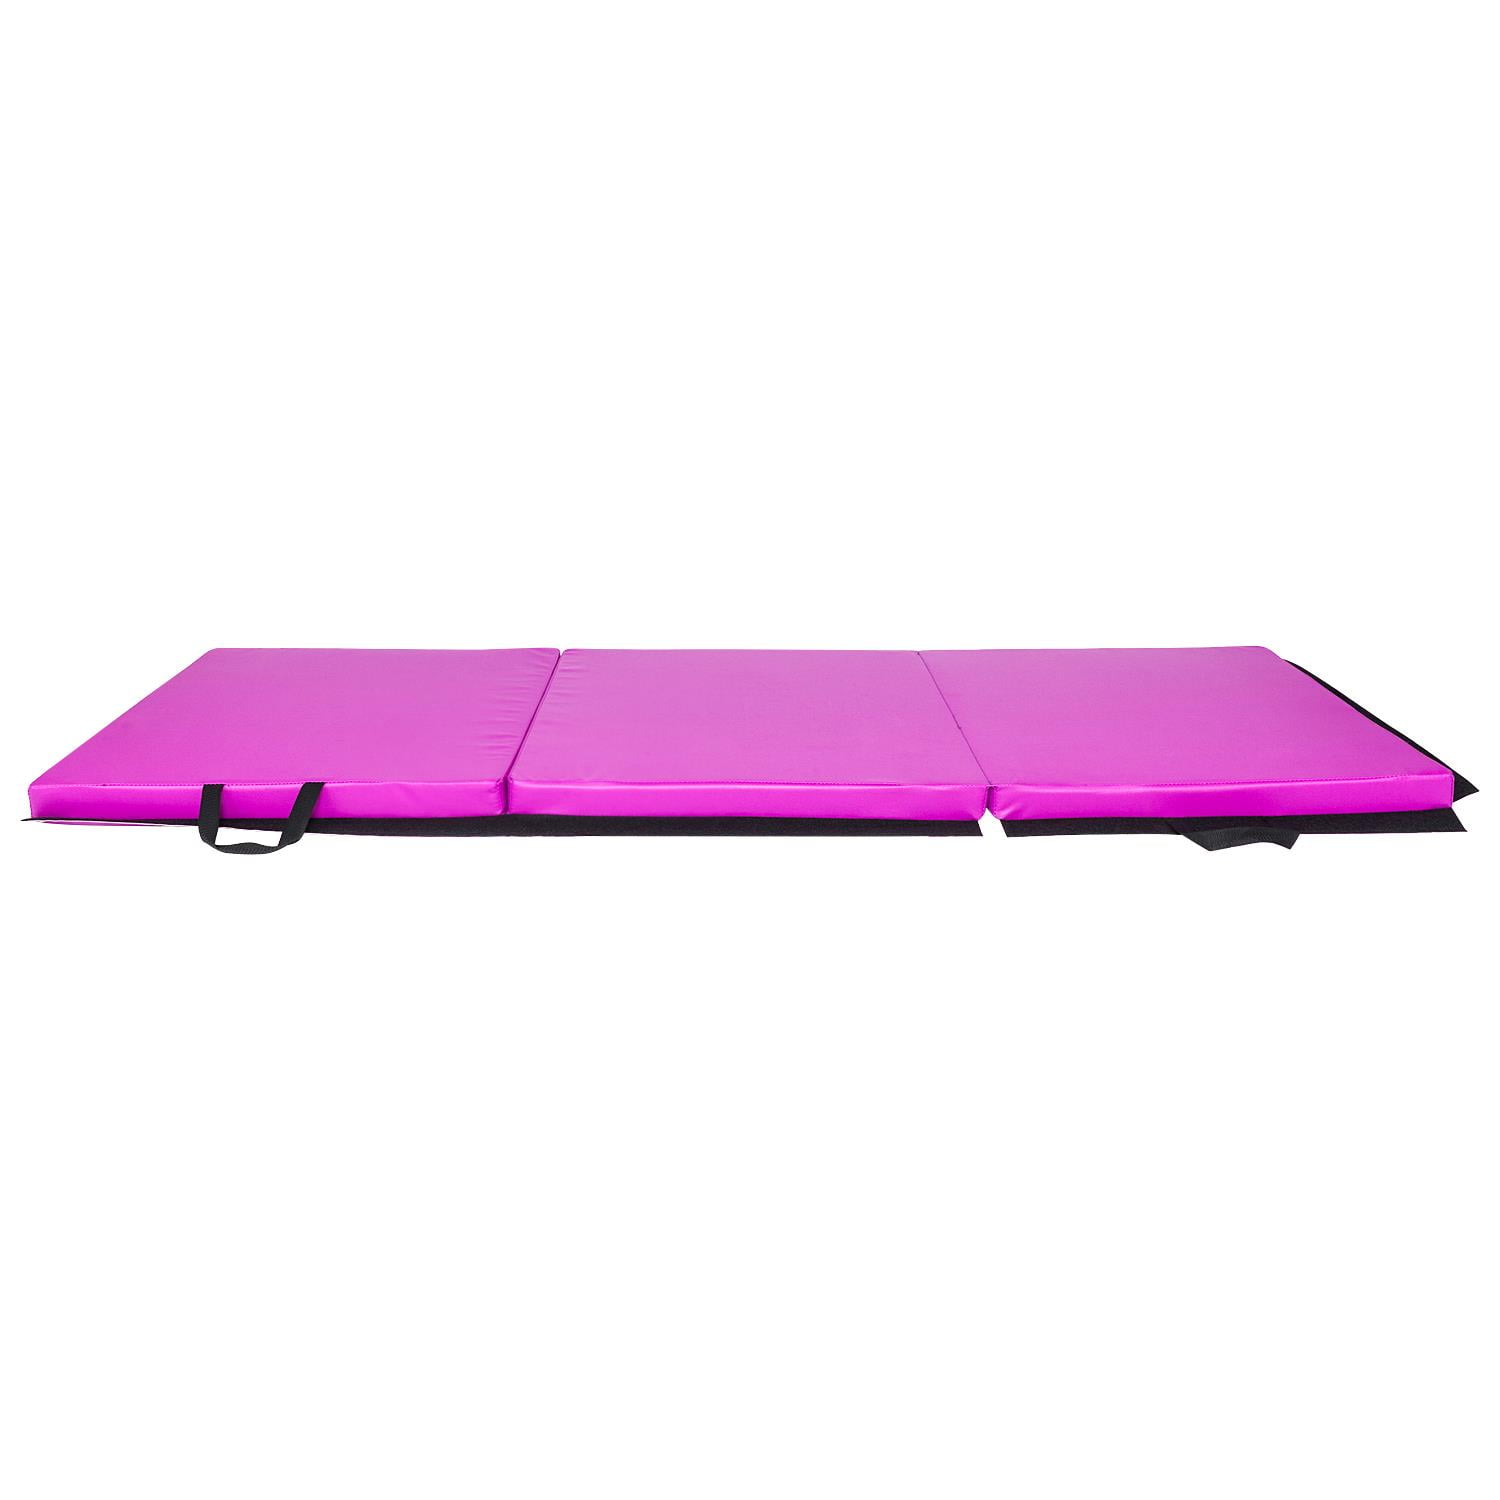 Tri Folding Gymnastic Mat Lightweight Portable Easy Maintenance Great for Yoga Pilates Aerobics Martial Arts 75 inches x 24 inches x 1.5 inches Pink 